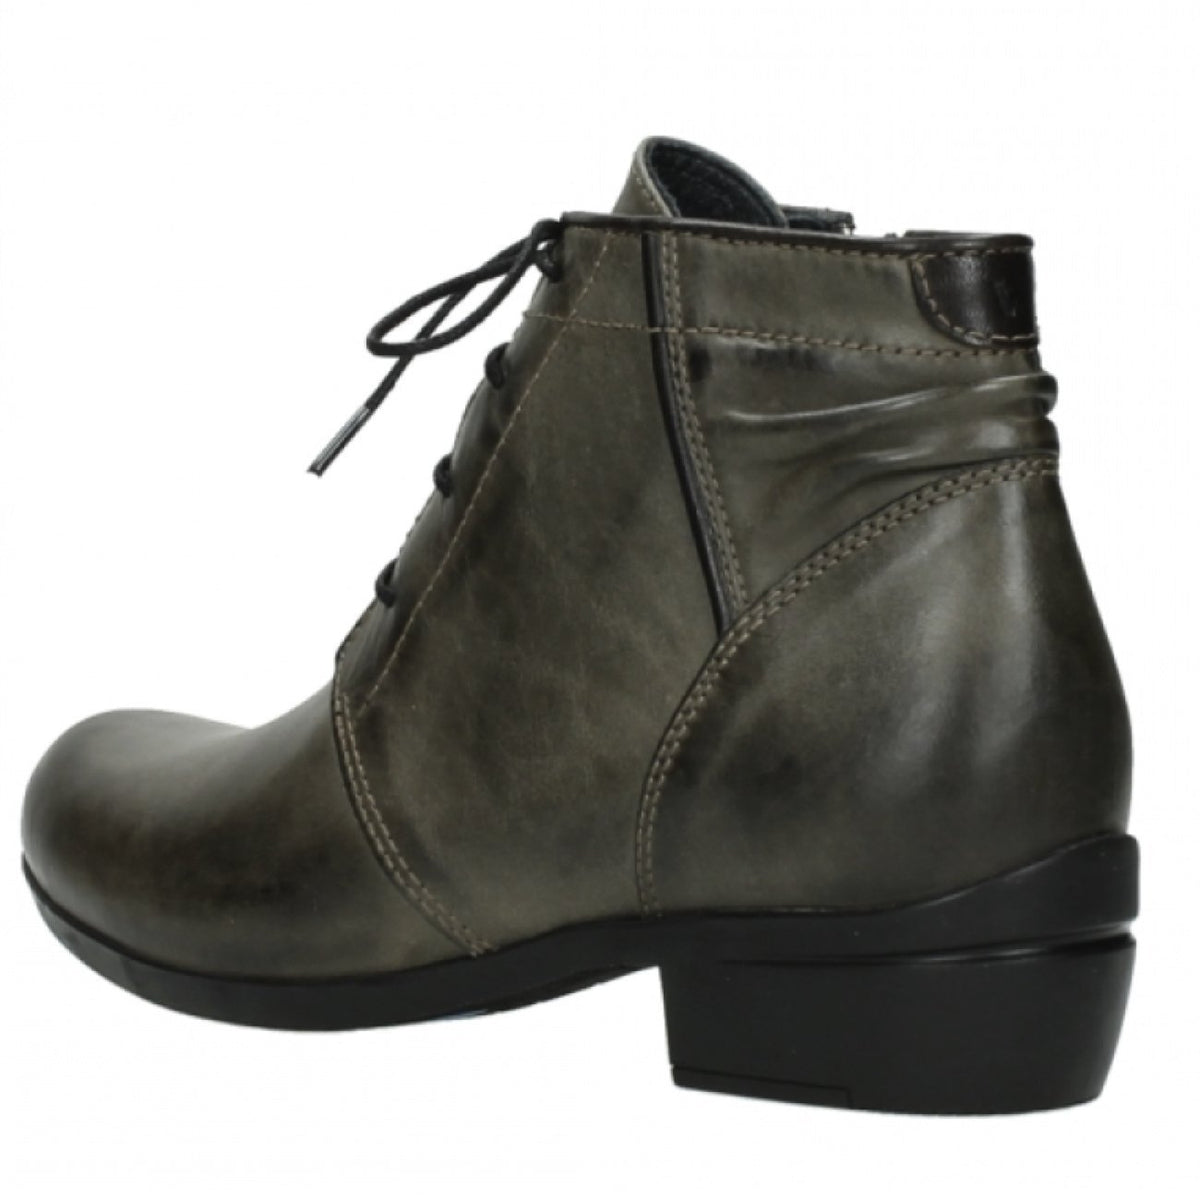 Wolky, Delano, Softy Wax Leather, Laceup Boot, Taupe Boots Wolky 